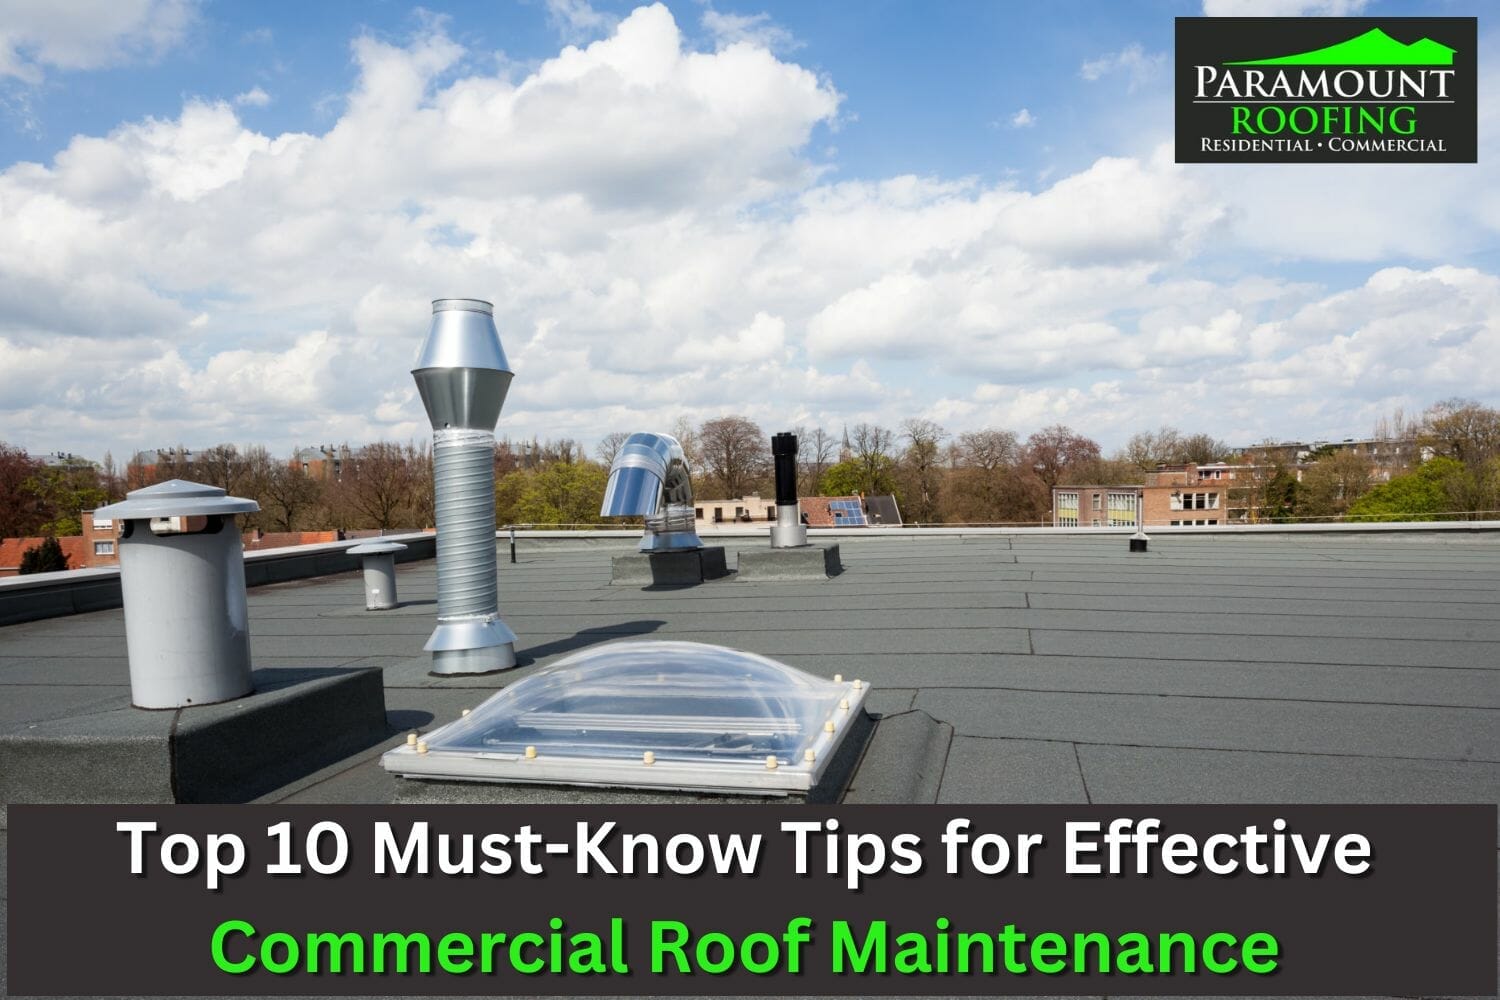 Top 10 Must-Know Tips for Effective Commercial Roof Maintenance